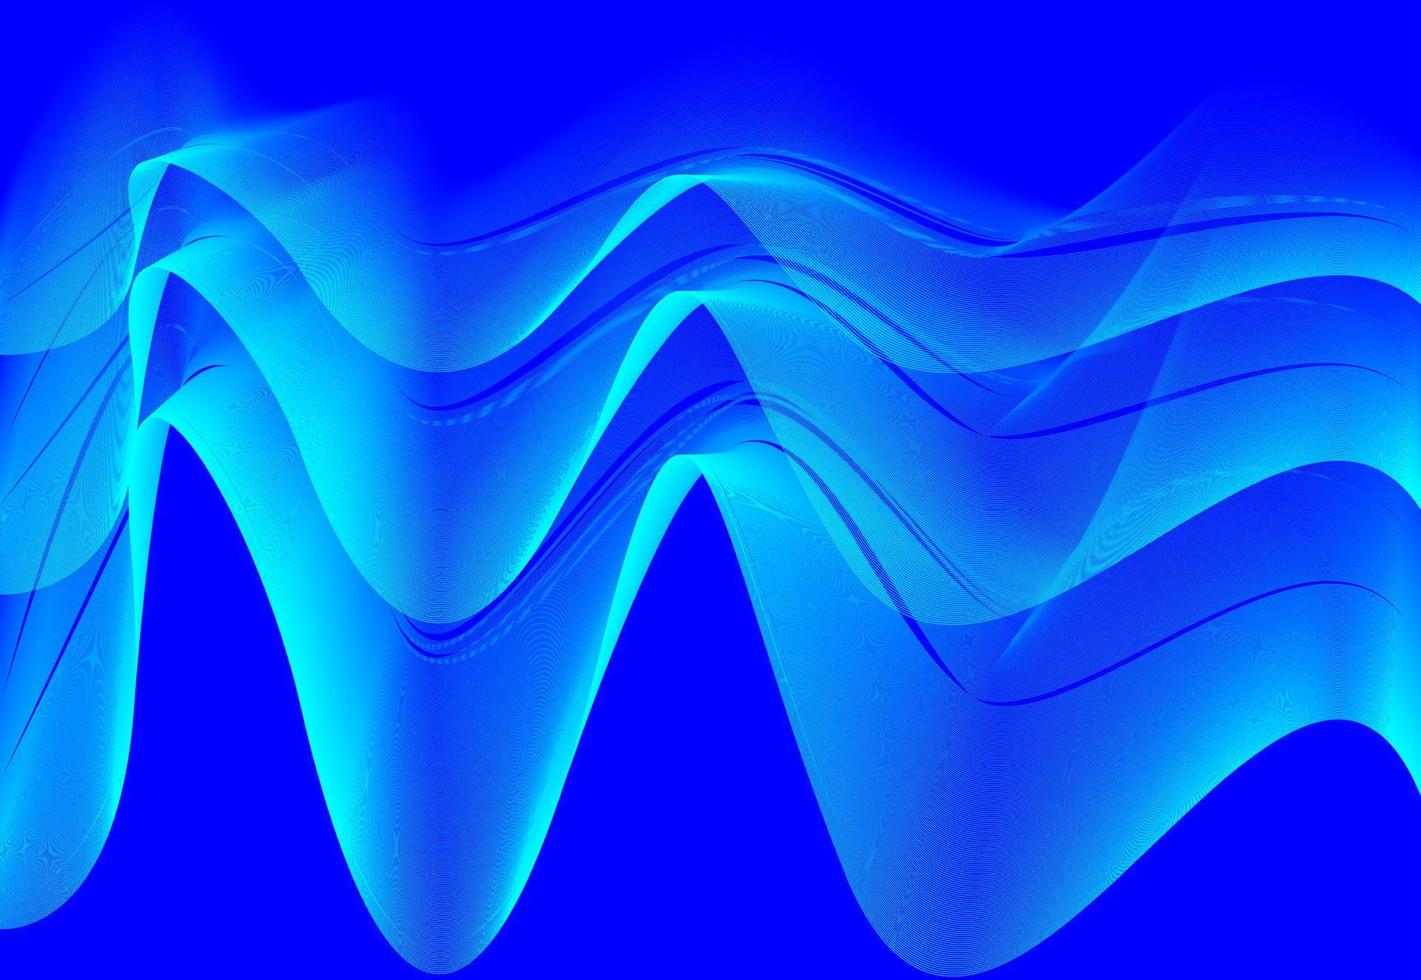 blue abstract background with gradient line art wave effect. futuristic graphics with sound wave technology concept. digital design with monochrome cover. modern templates vector